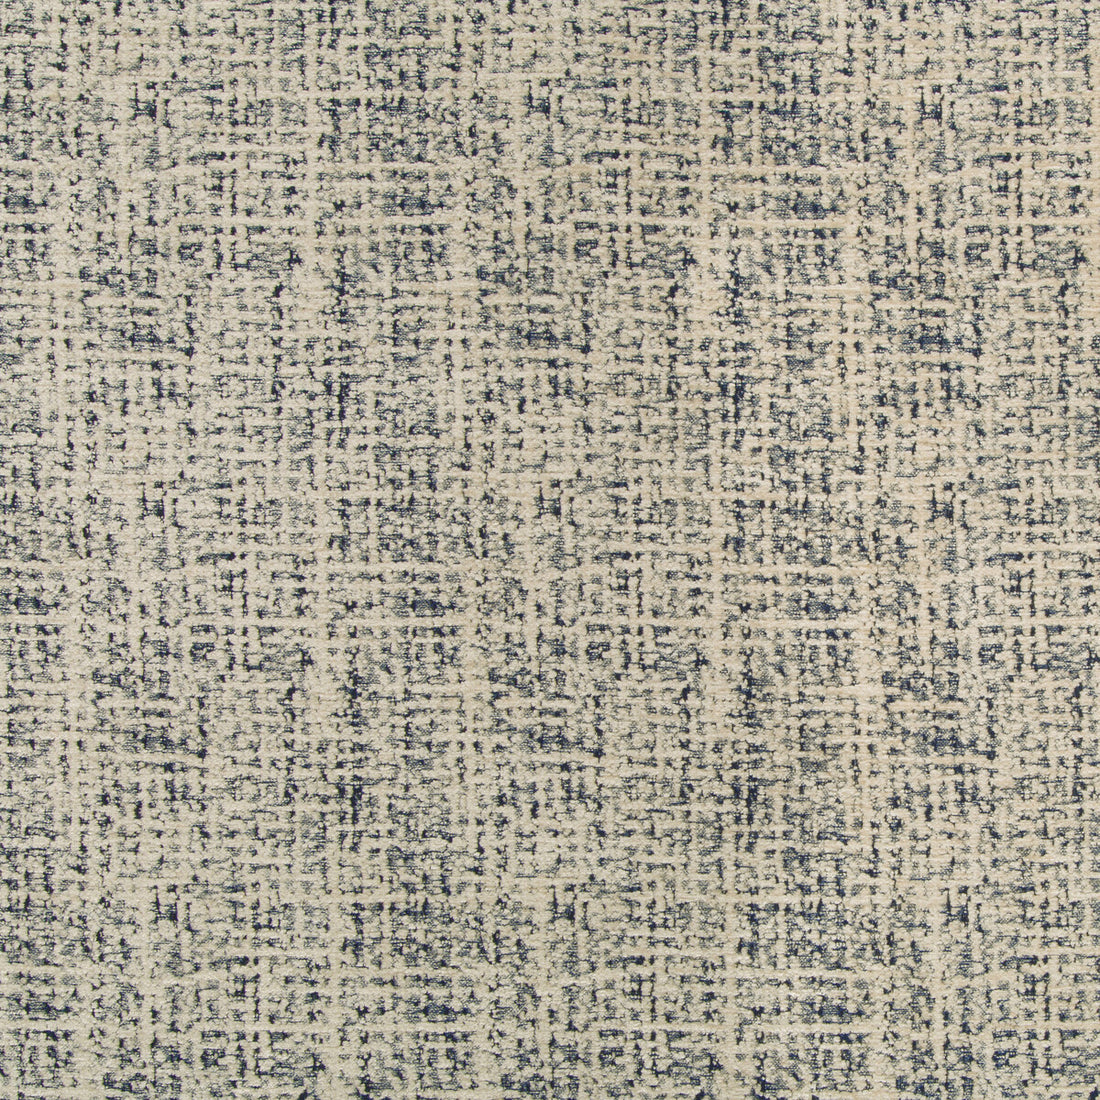 Kravet Design fabric in 35704-516 color - pattern 35704.516.0 - by Kravet Design in the Woven Colors collection